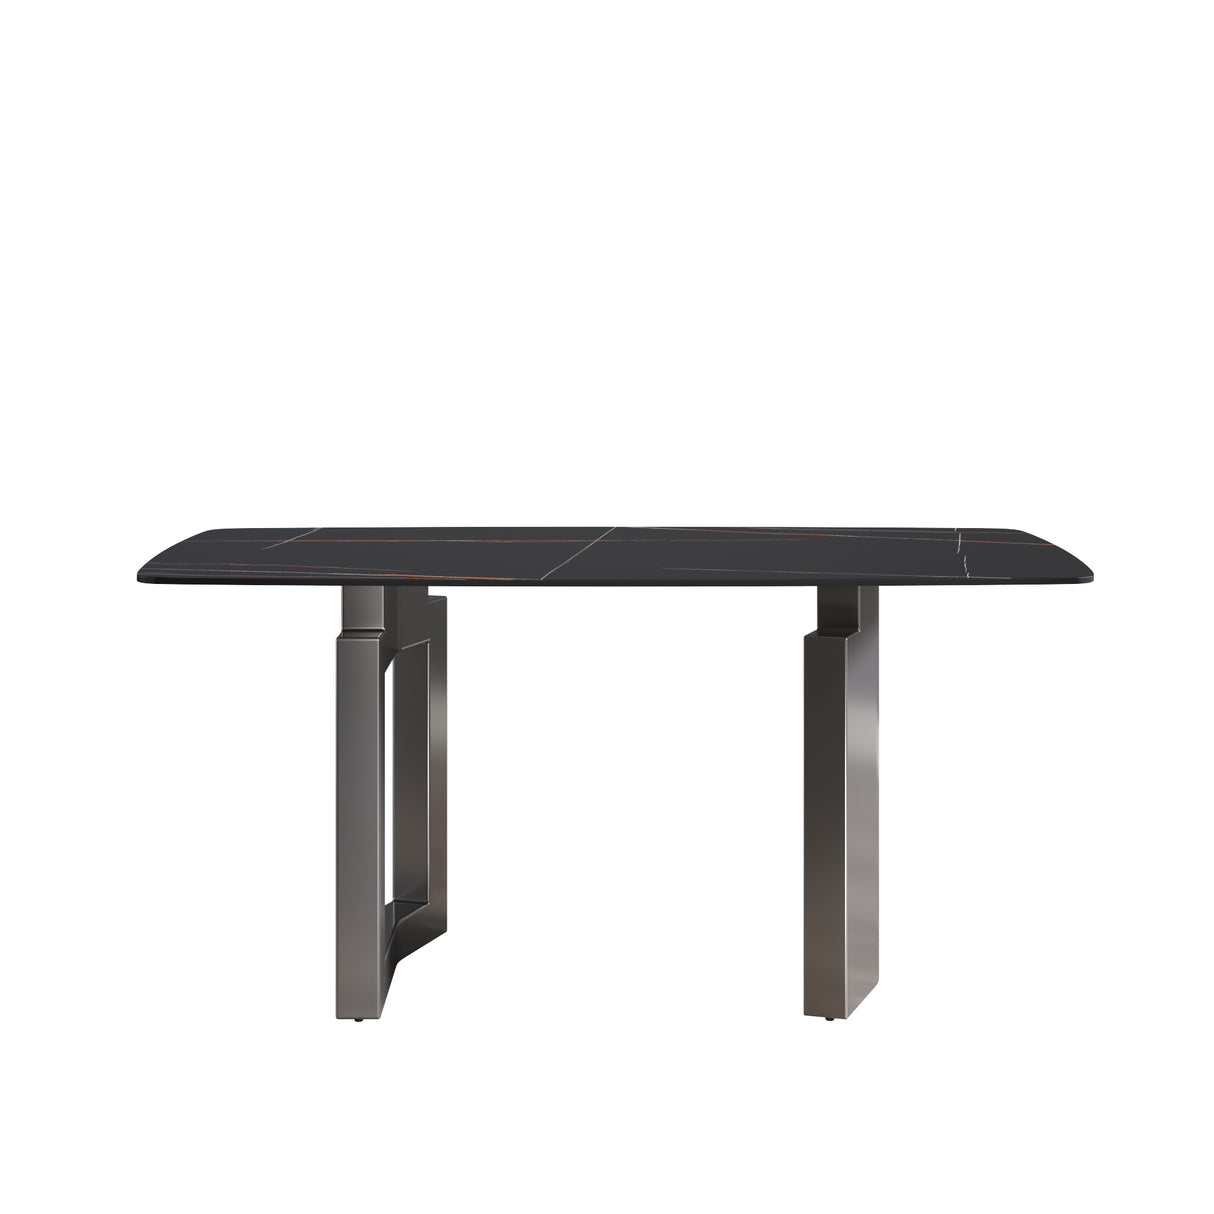 63"Modern artificial stone black curved black metal leg dining table -6 people - Home Elegance USA